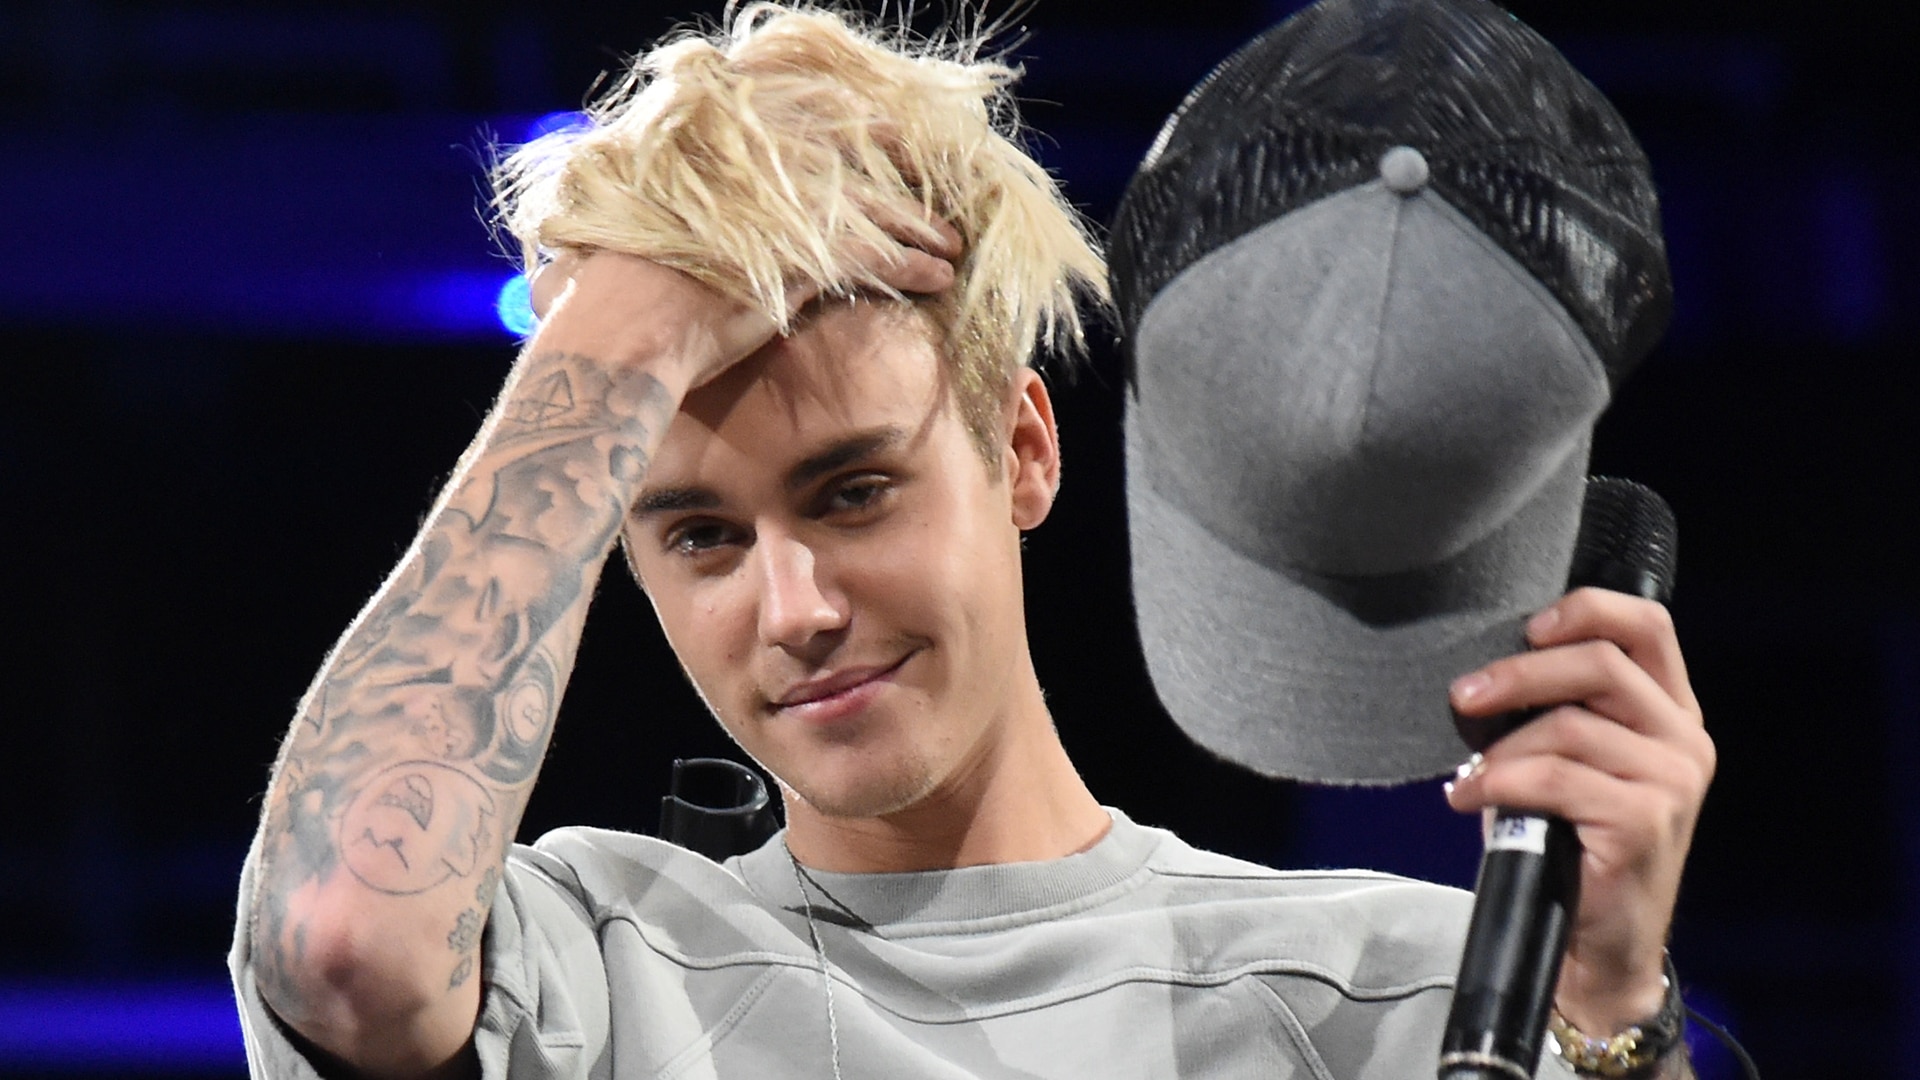 Watch Access Hollywood Interview: Justin Bieber Just Shined A Hopeful Light...